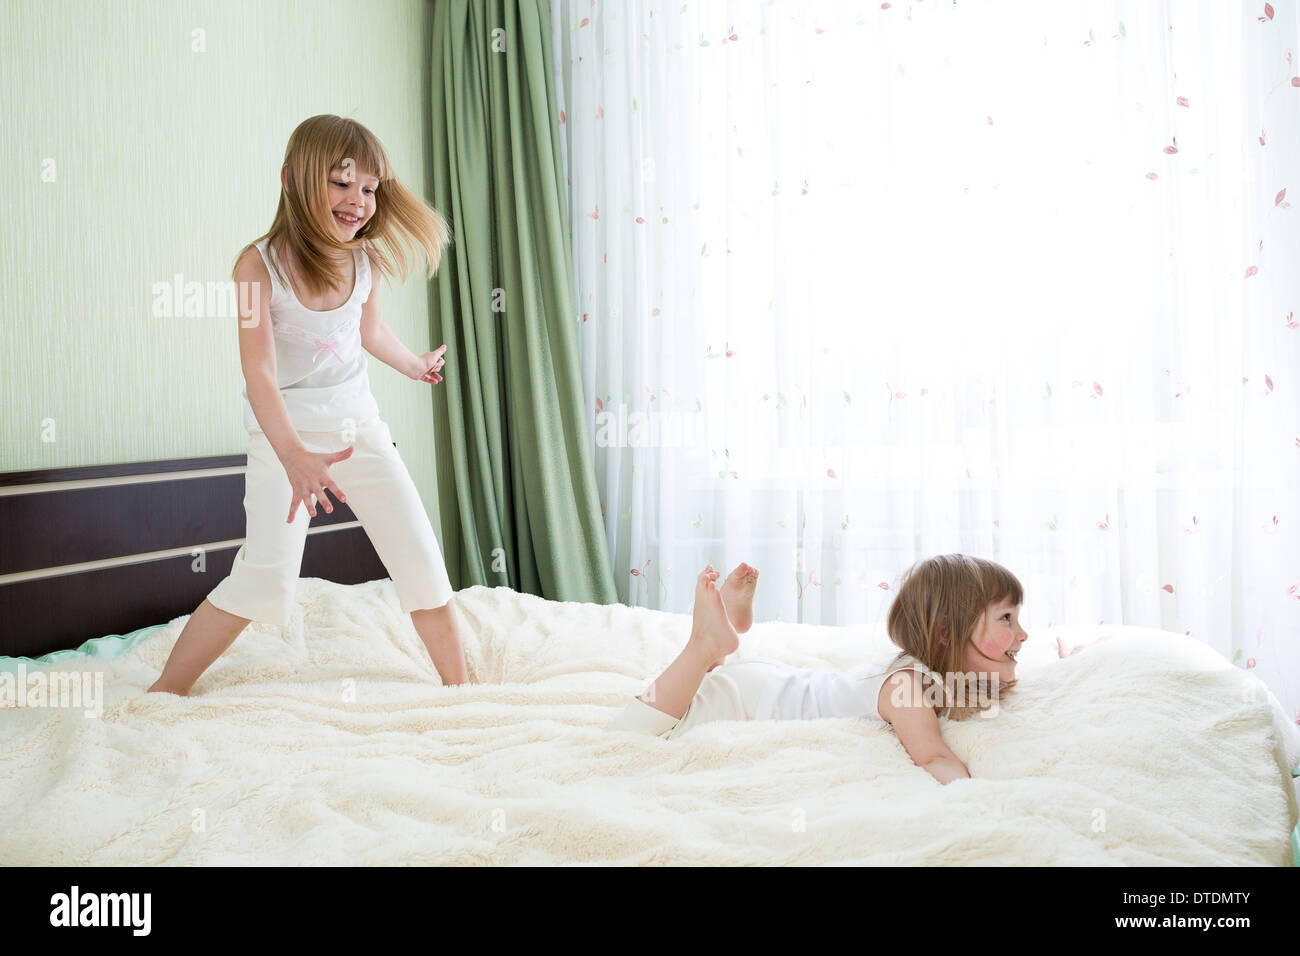 Two sisters playing on bed together Stock Photo